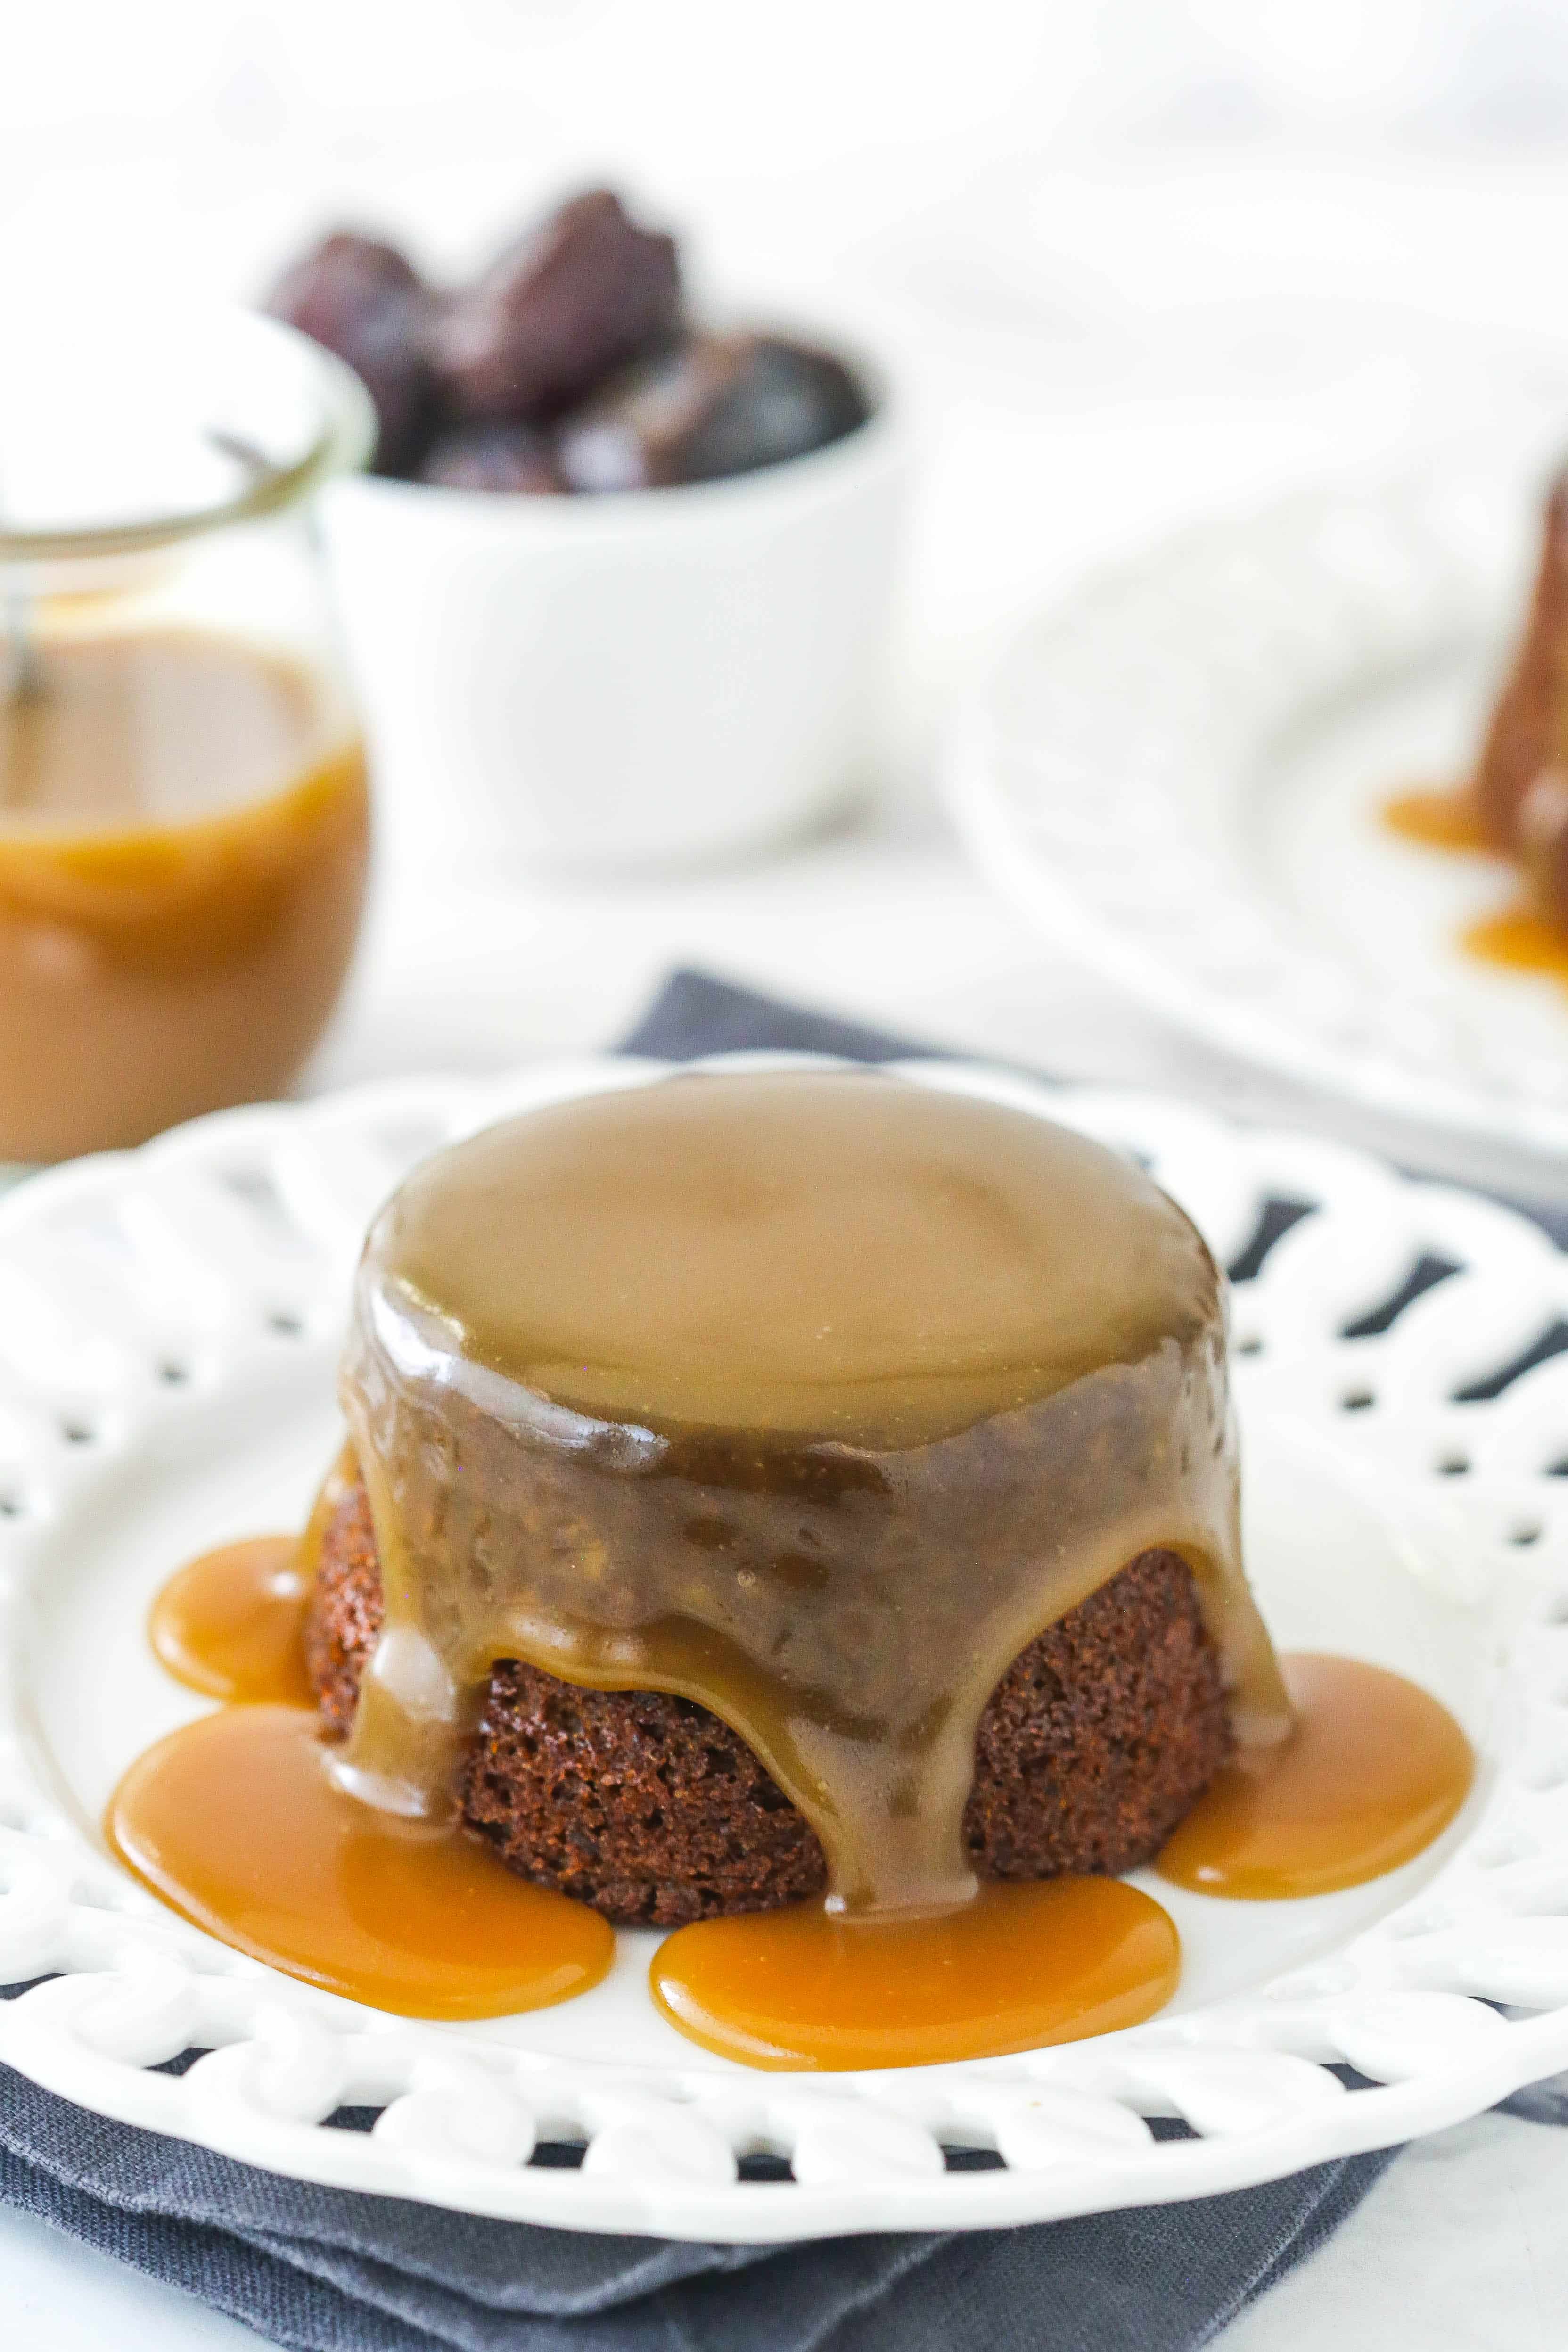 Sticky Toffee Pudding! - Jane's Patisserie